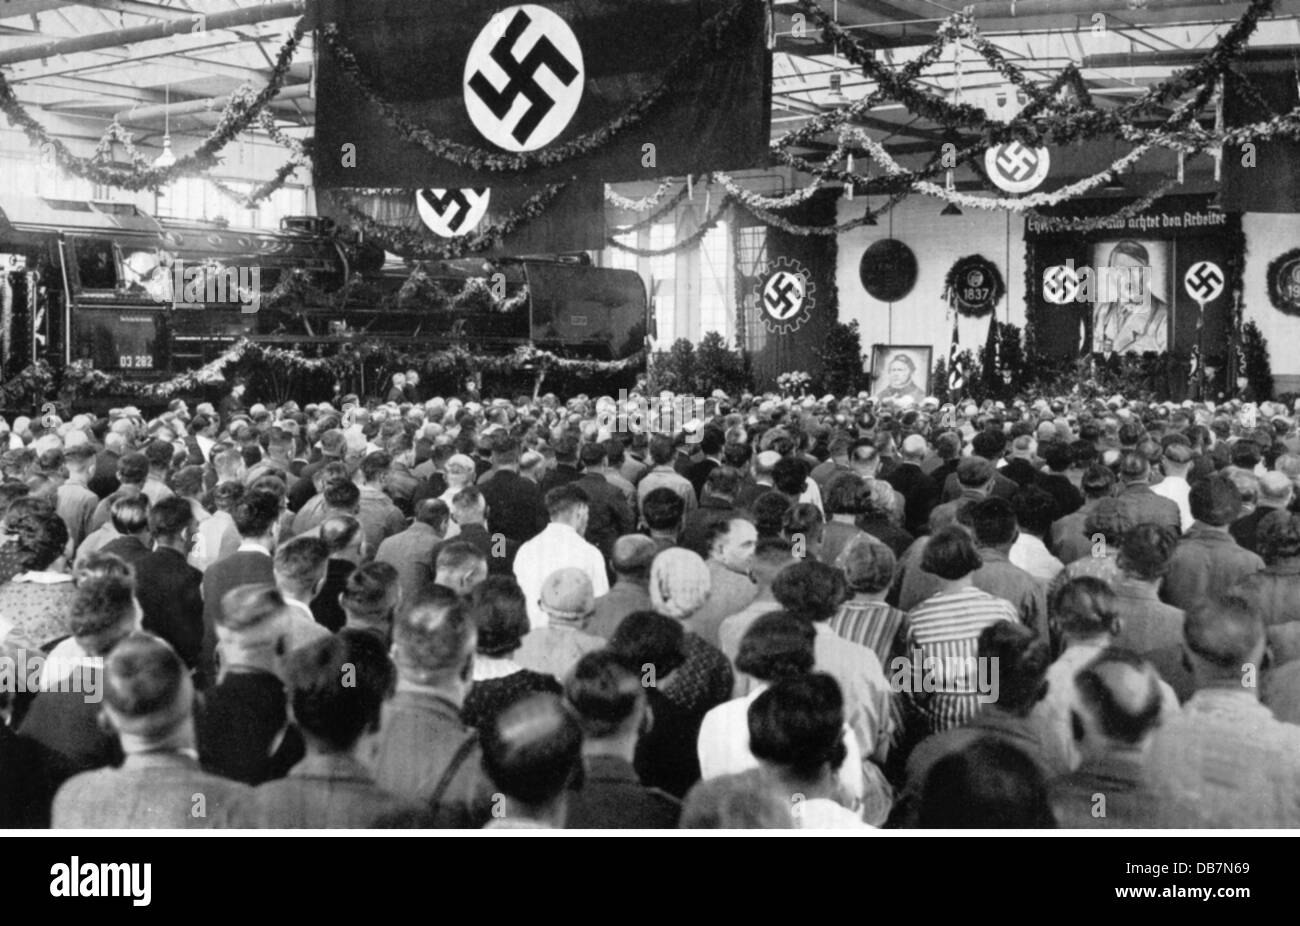 Nazism / National Socialism, event, 100. anniversary of the Borsig Engine Works, Henningsdorf, 27.7.1937, Additional-Rights-Clearences-Not Available Stock Photo